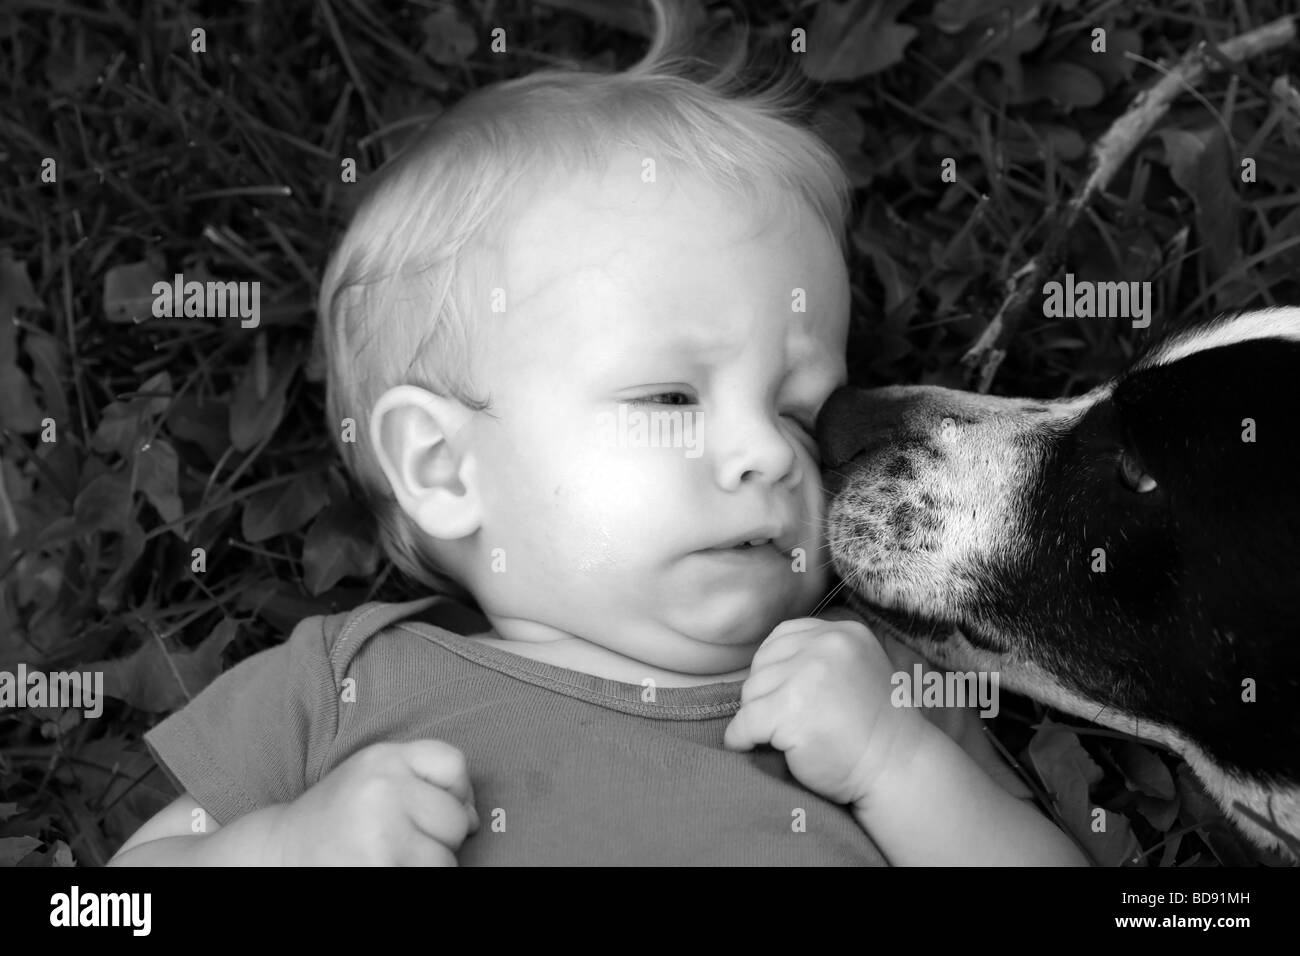 Dog getting ready to lick child. Stock Photo